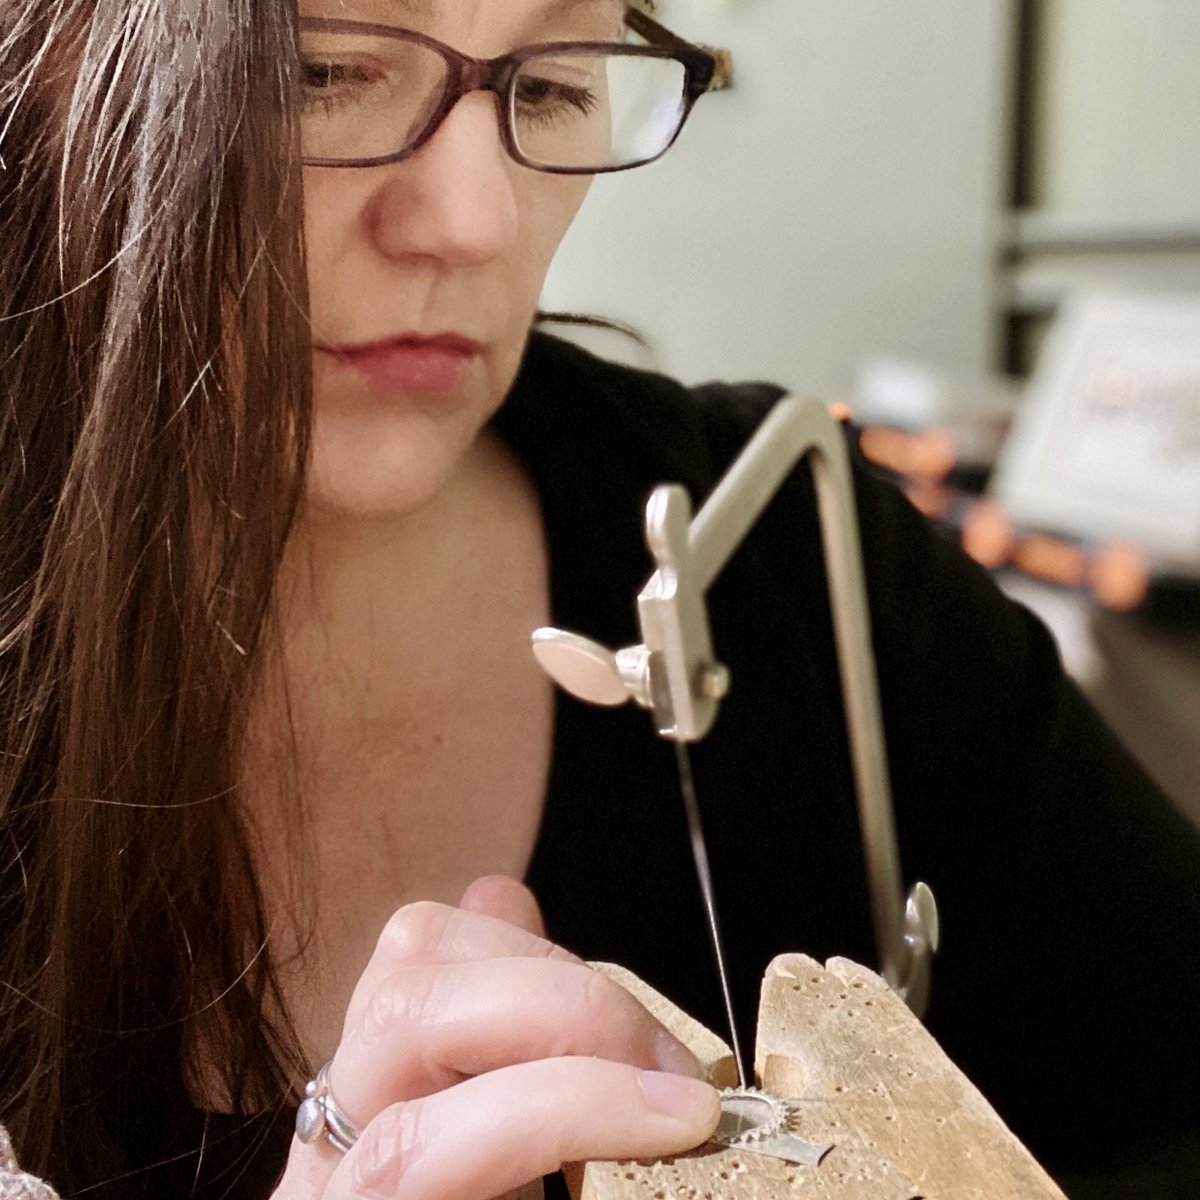 Jenny is the owner/designer behind Fickle Fancies Jewellery. She grew up believing that if she wanted to do something she could find the info to teach herself, and that is what she has always done.

https://t.co/vb0xYgtUqs

~*~

#designerspotlight #madeitau #jewellerydesigner https://t.co/uvpkgYOWgJ